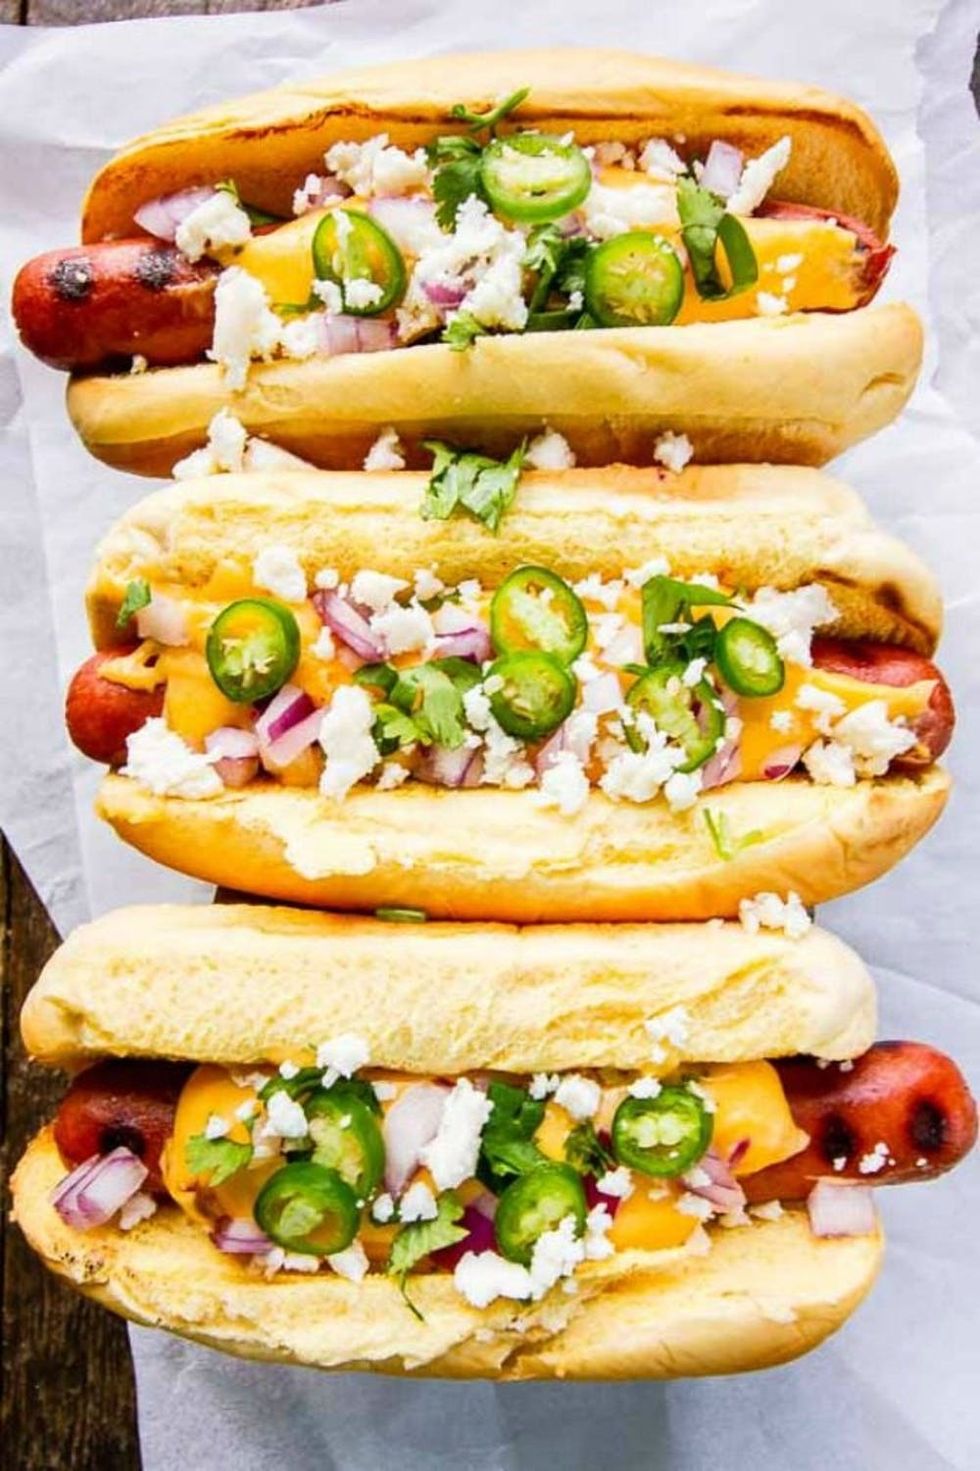 Gourmet Hot Dogs Recipes - Brit + Co